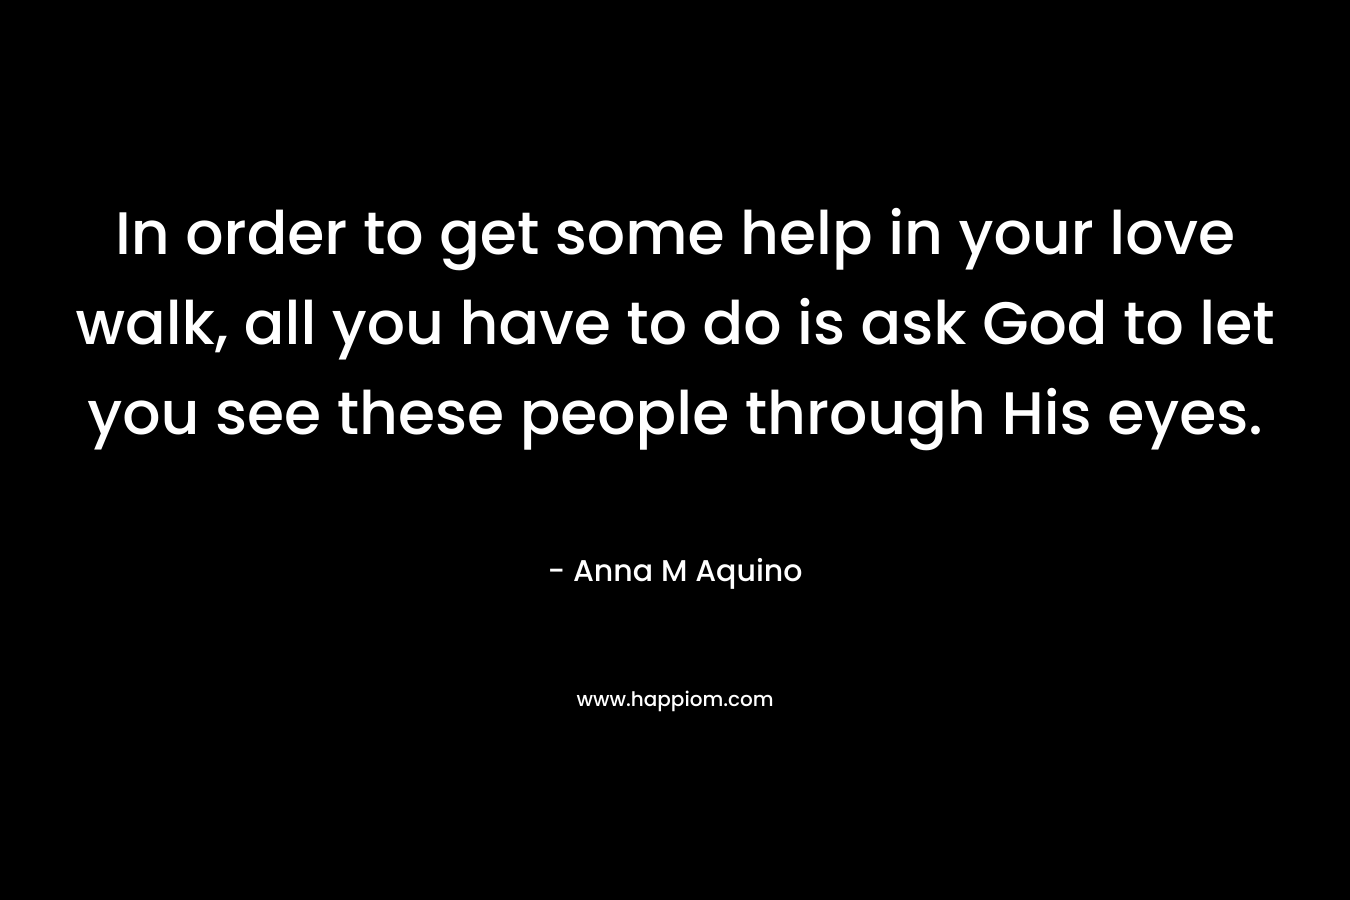 In order to get some help in your love walk, all you have to do is ask God to let you see these people through His eyes.